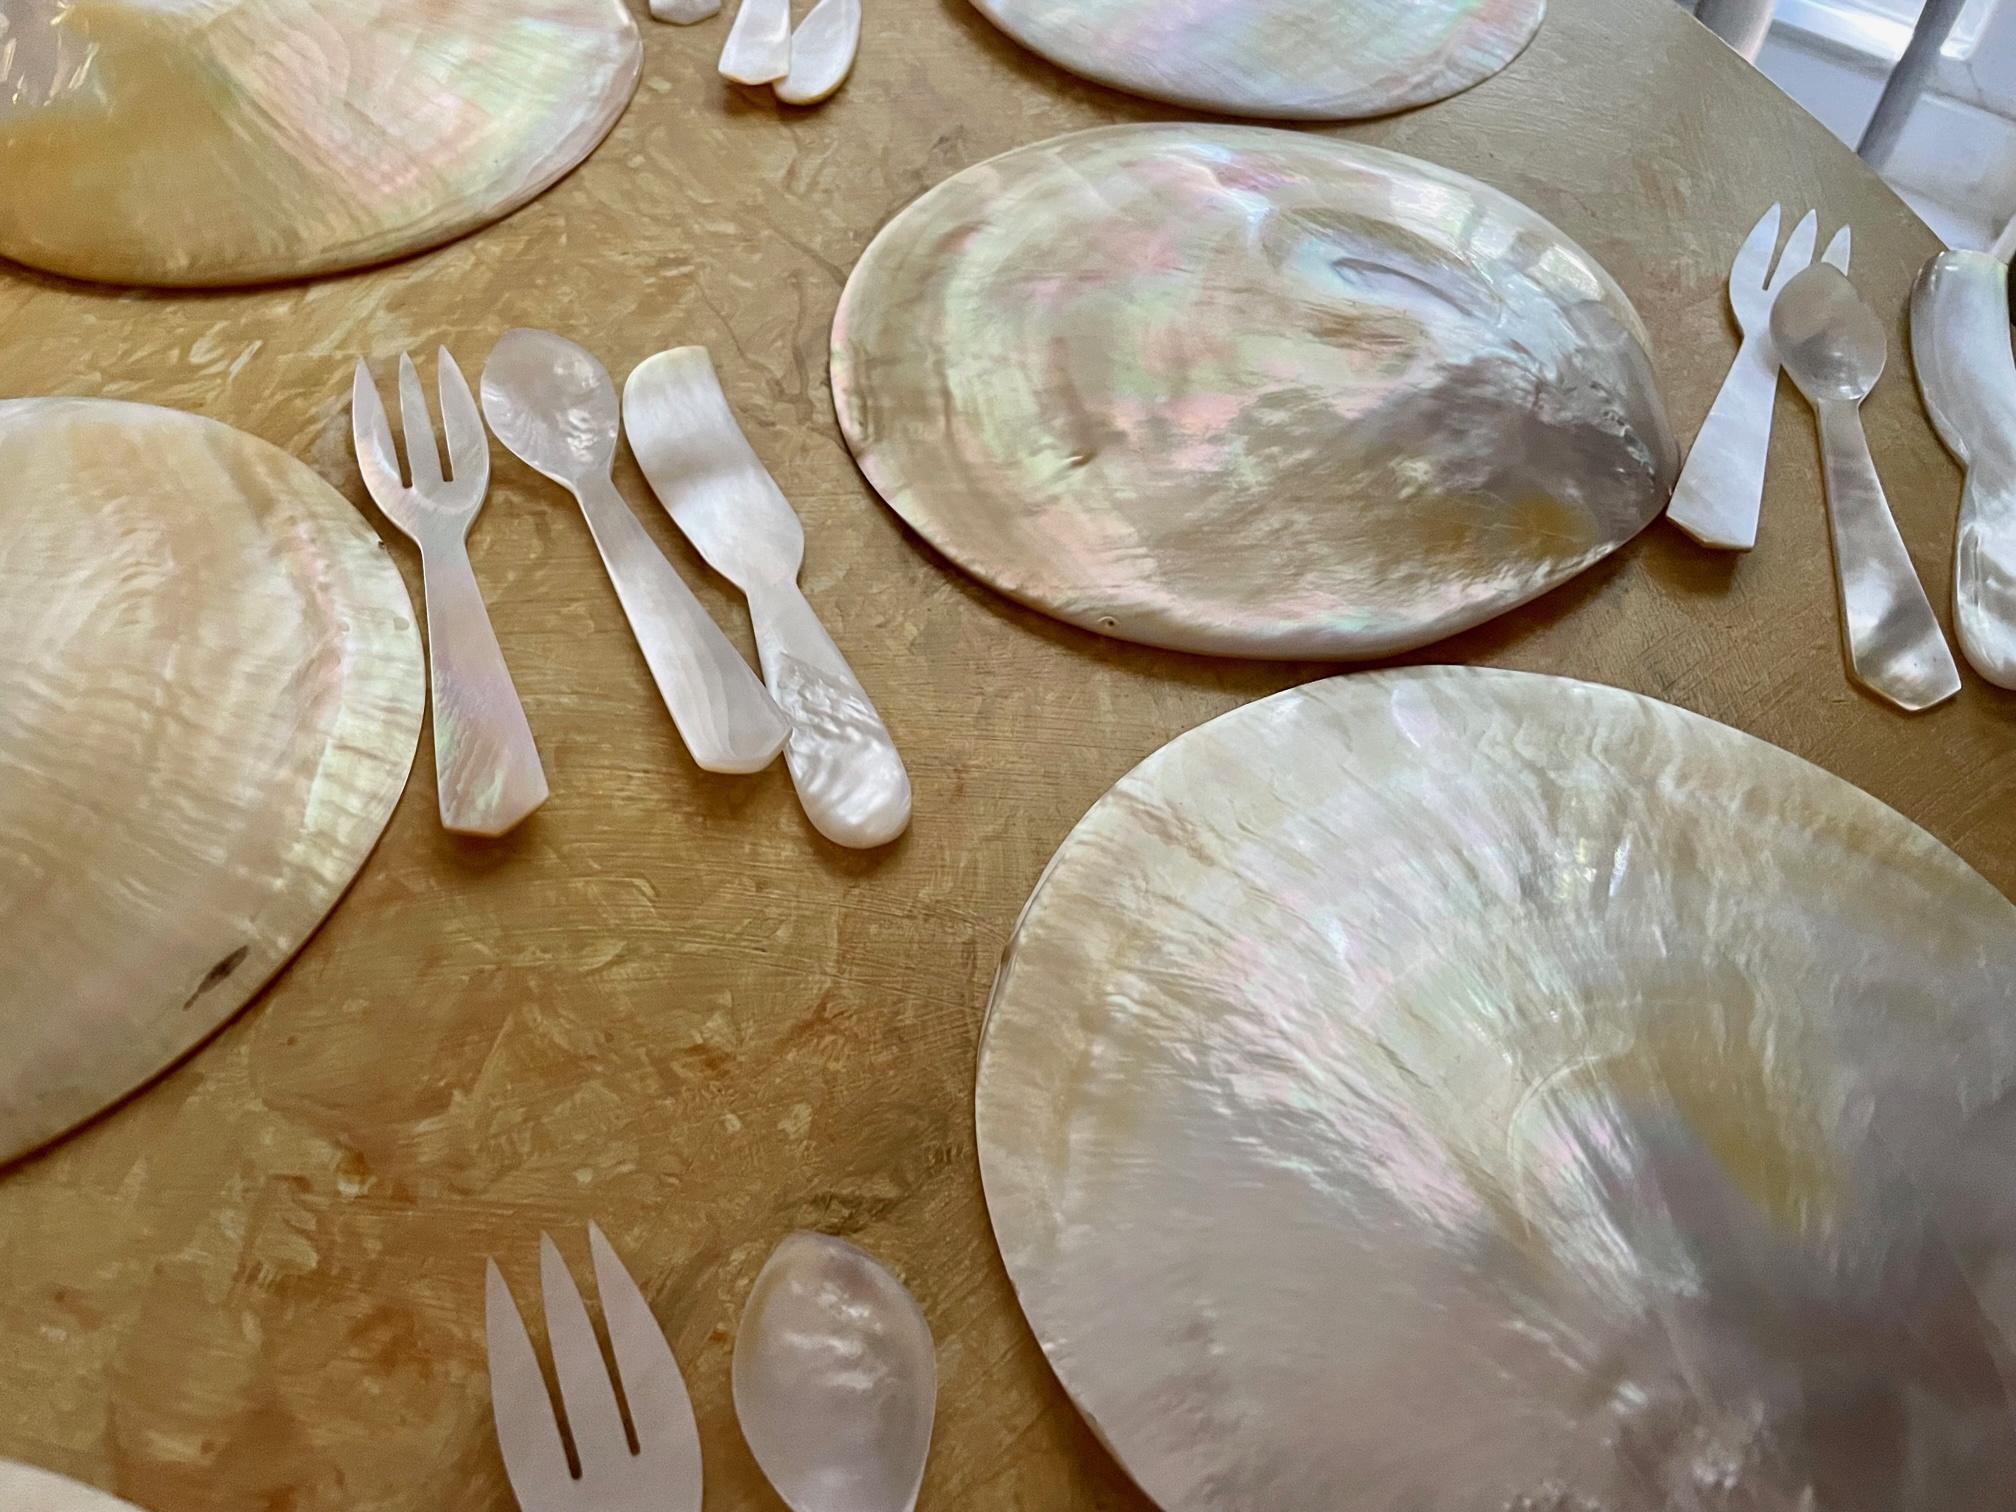 Mother-of-Pearl Mother of Pearl Seashell Caviar Dish with Cutlery, 8 Complete Sets